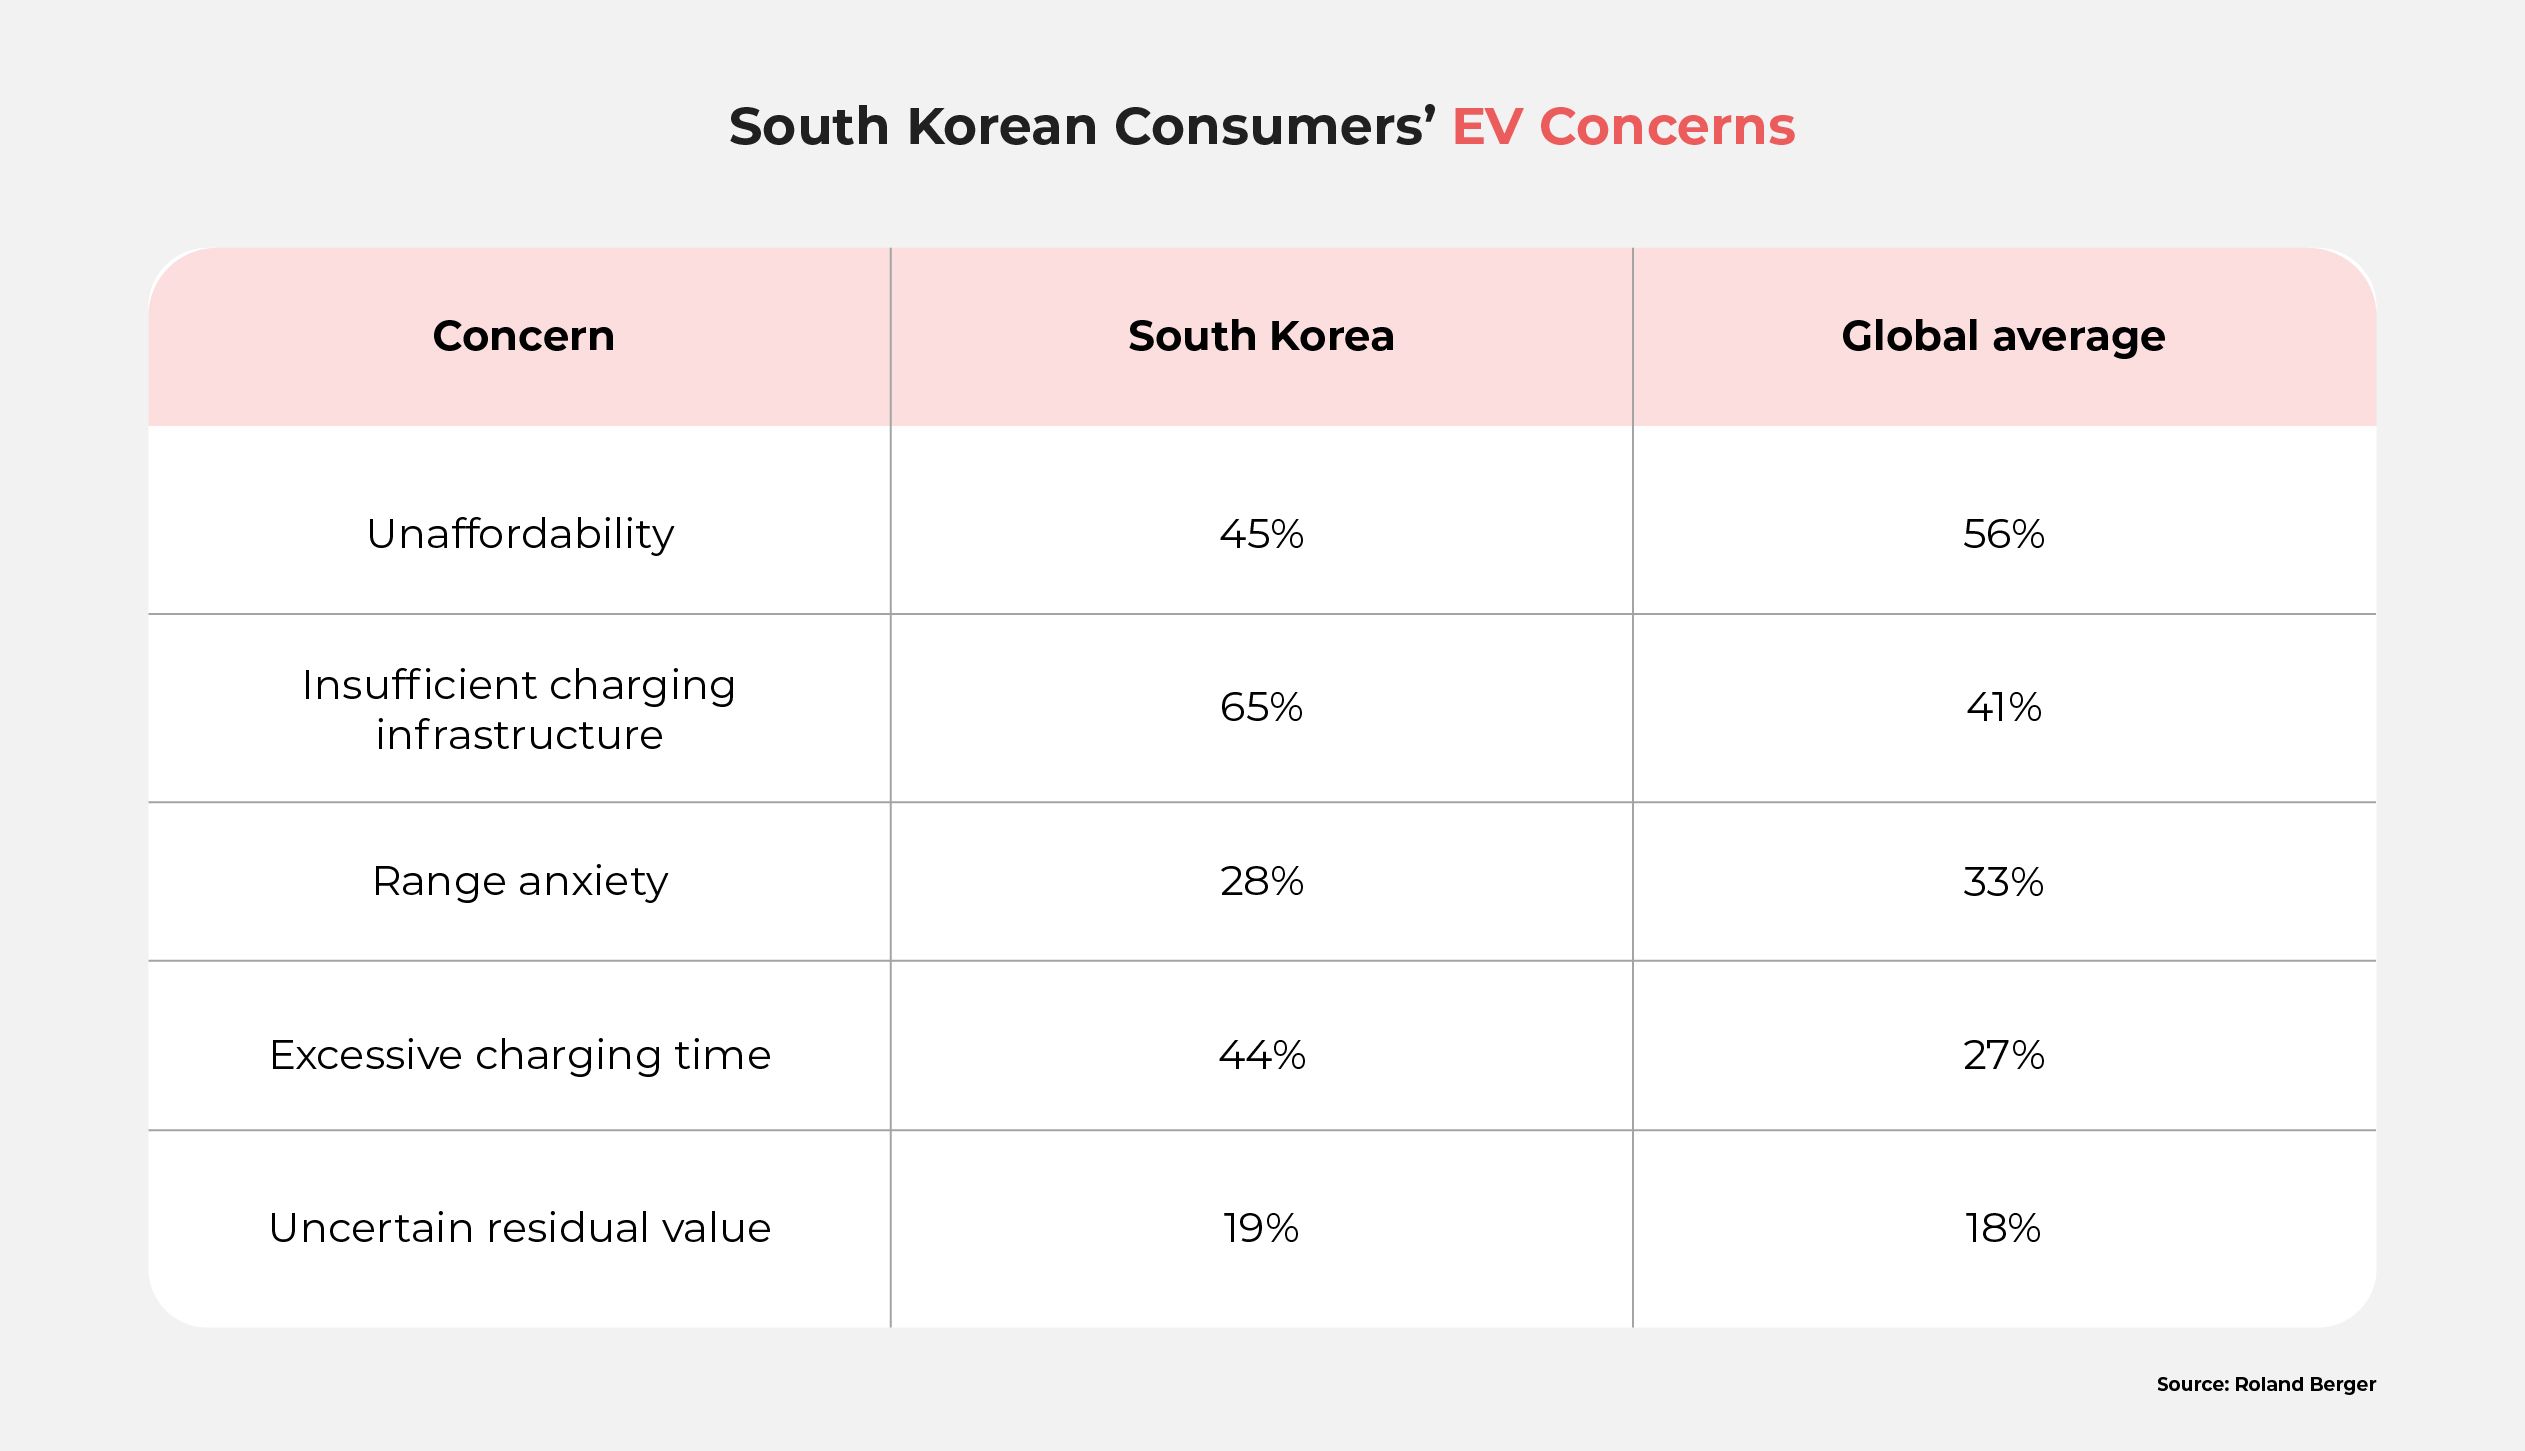 A table showing results from a survey about South Korean consumers' EV-related concerns